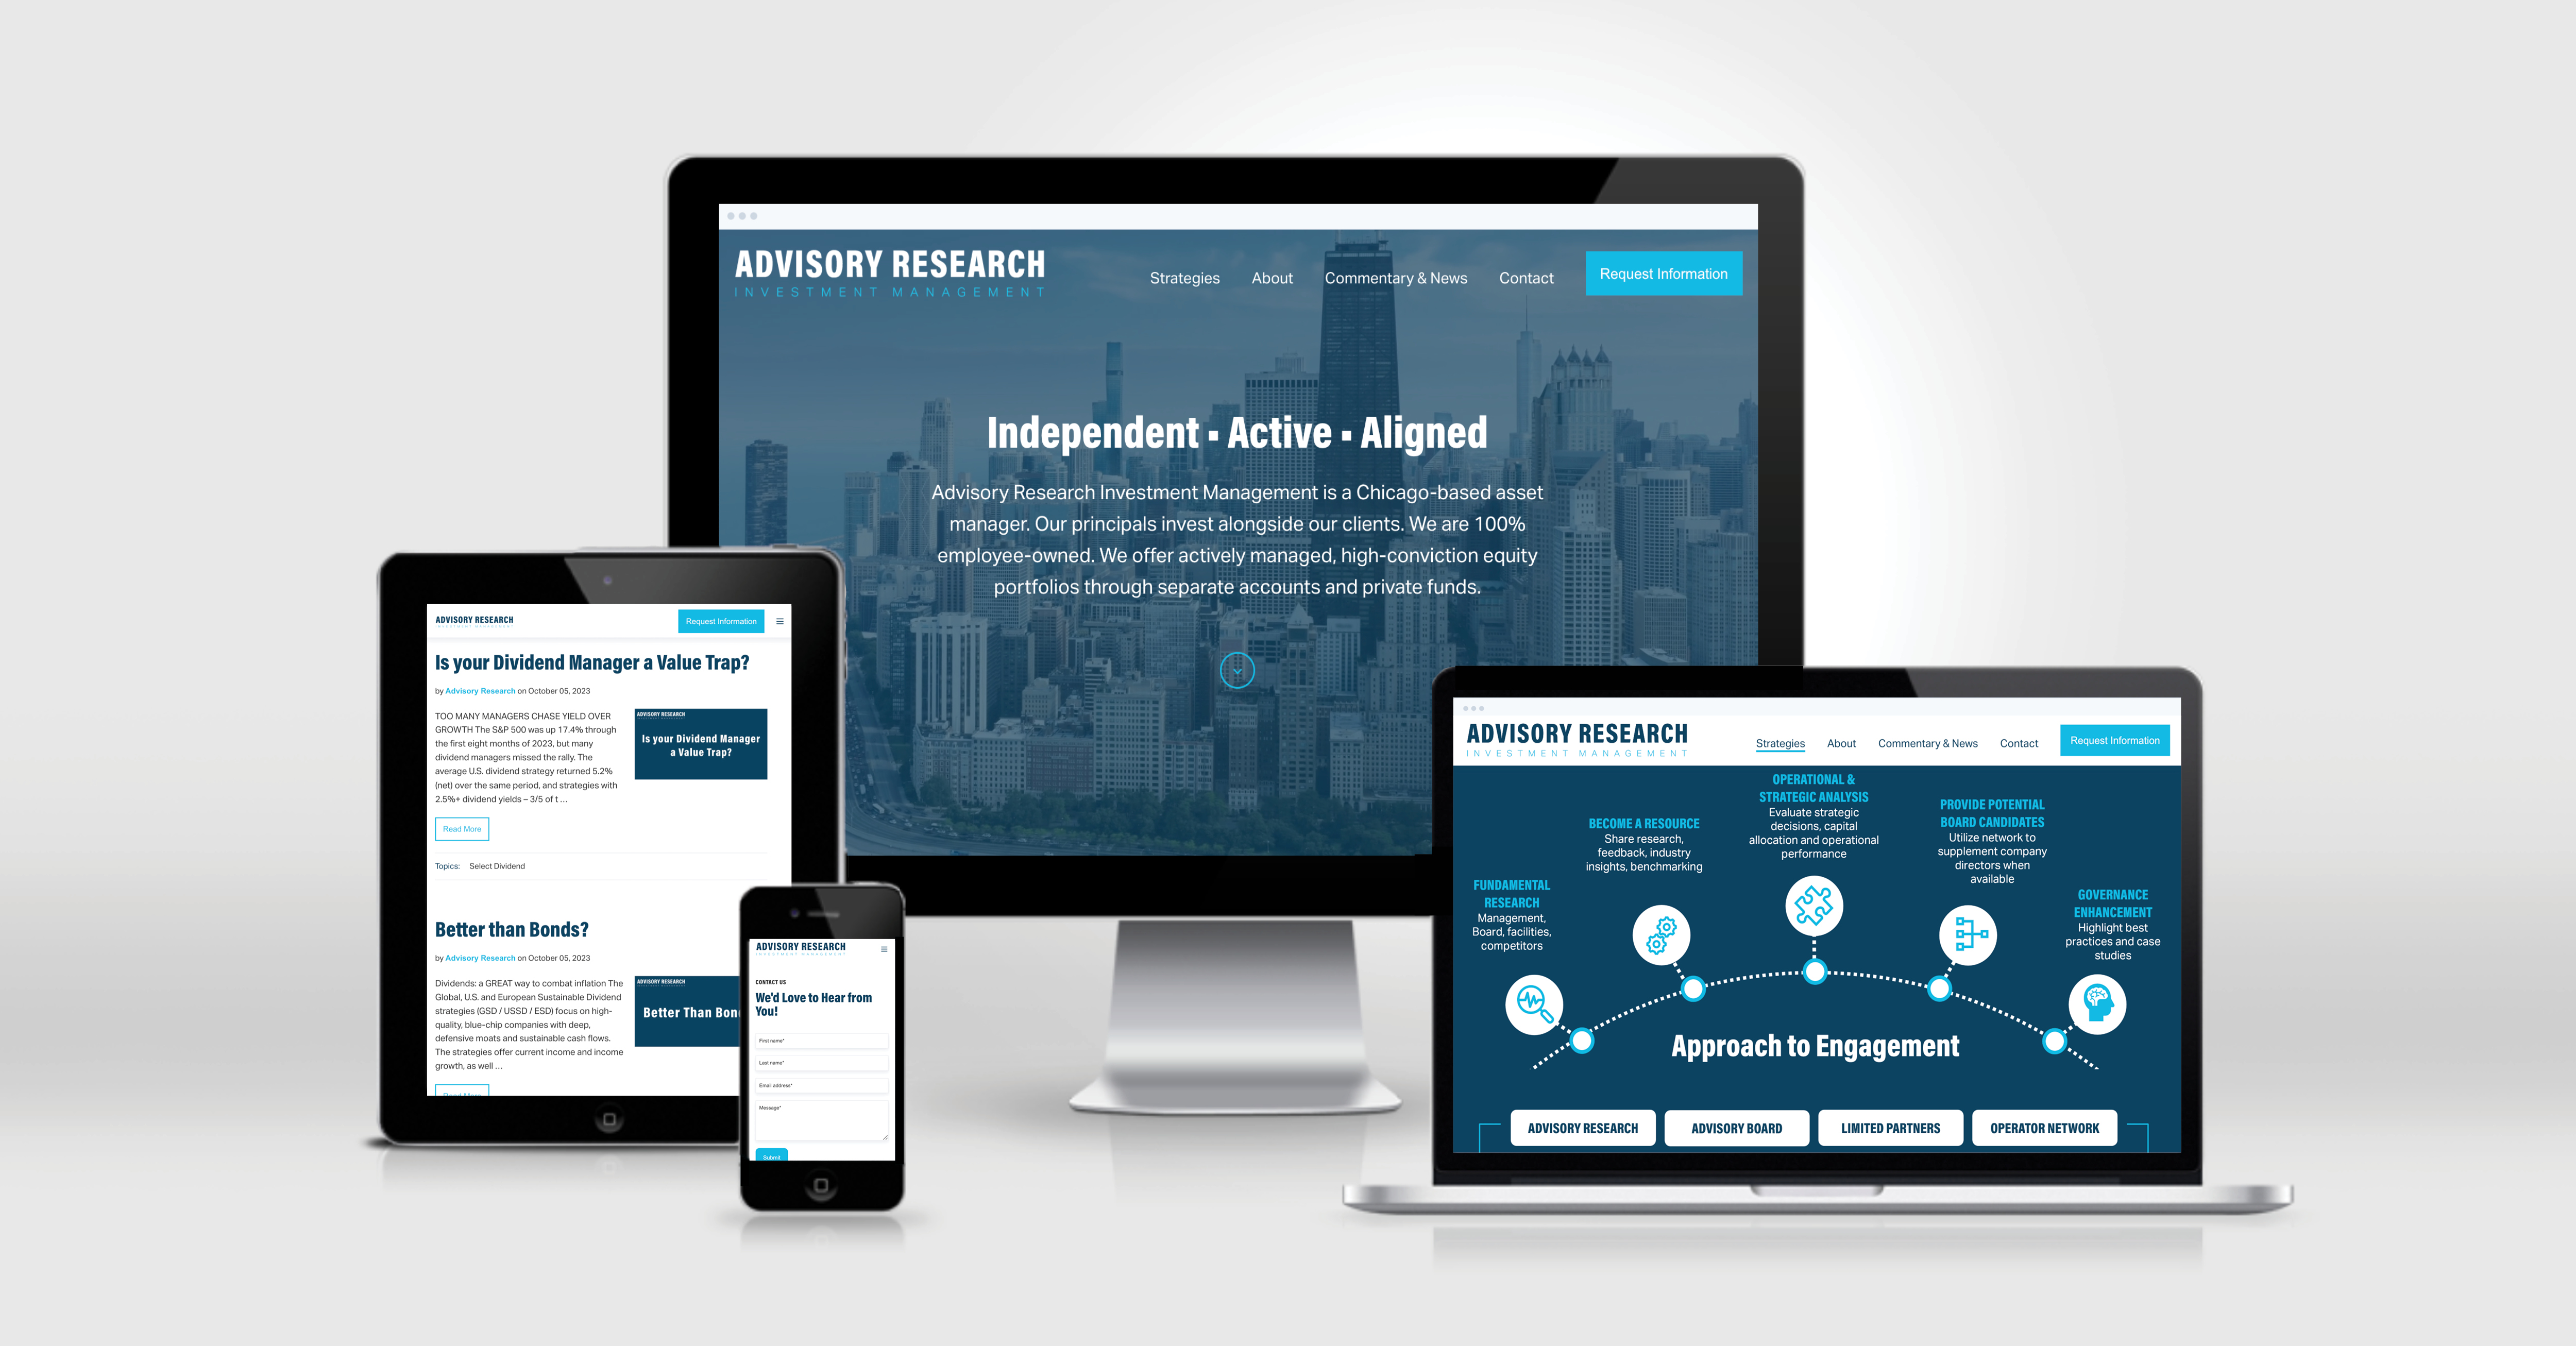 Announcing the New Advisory Research Investment Management Web Site